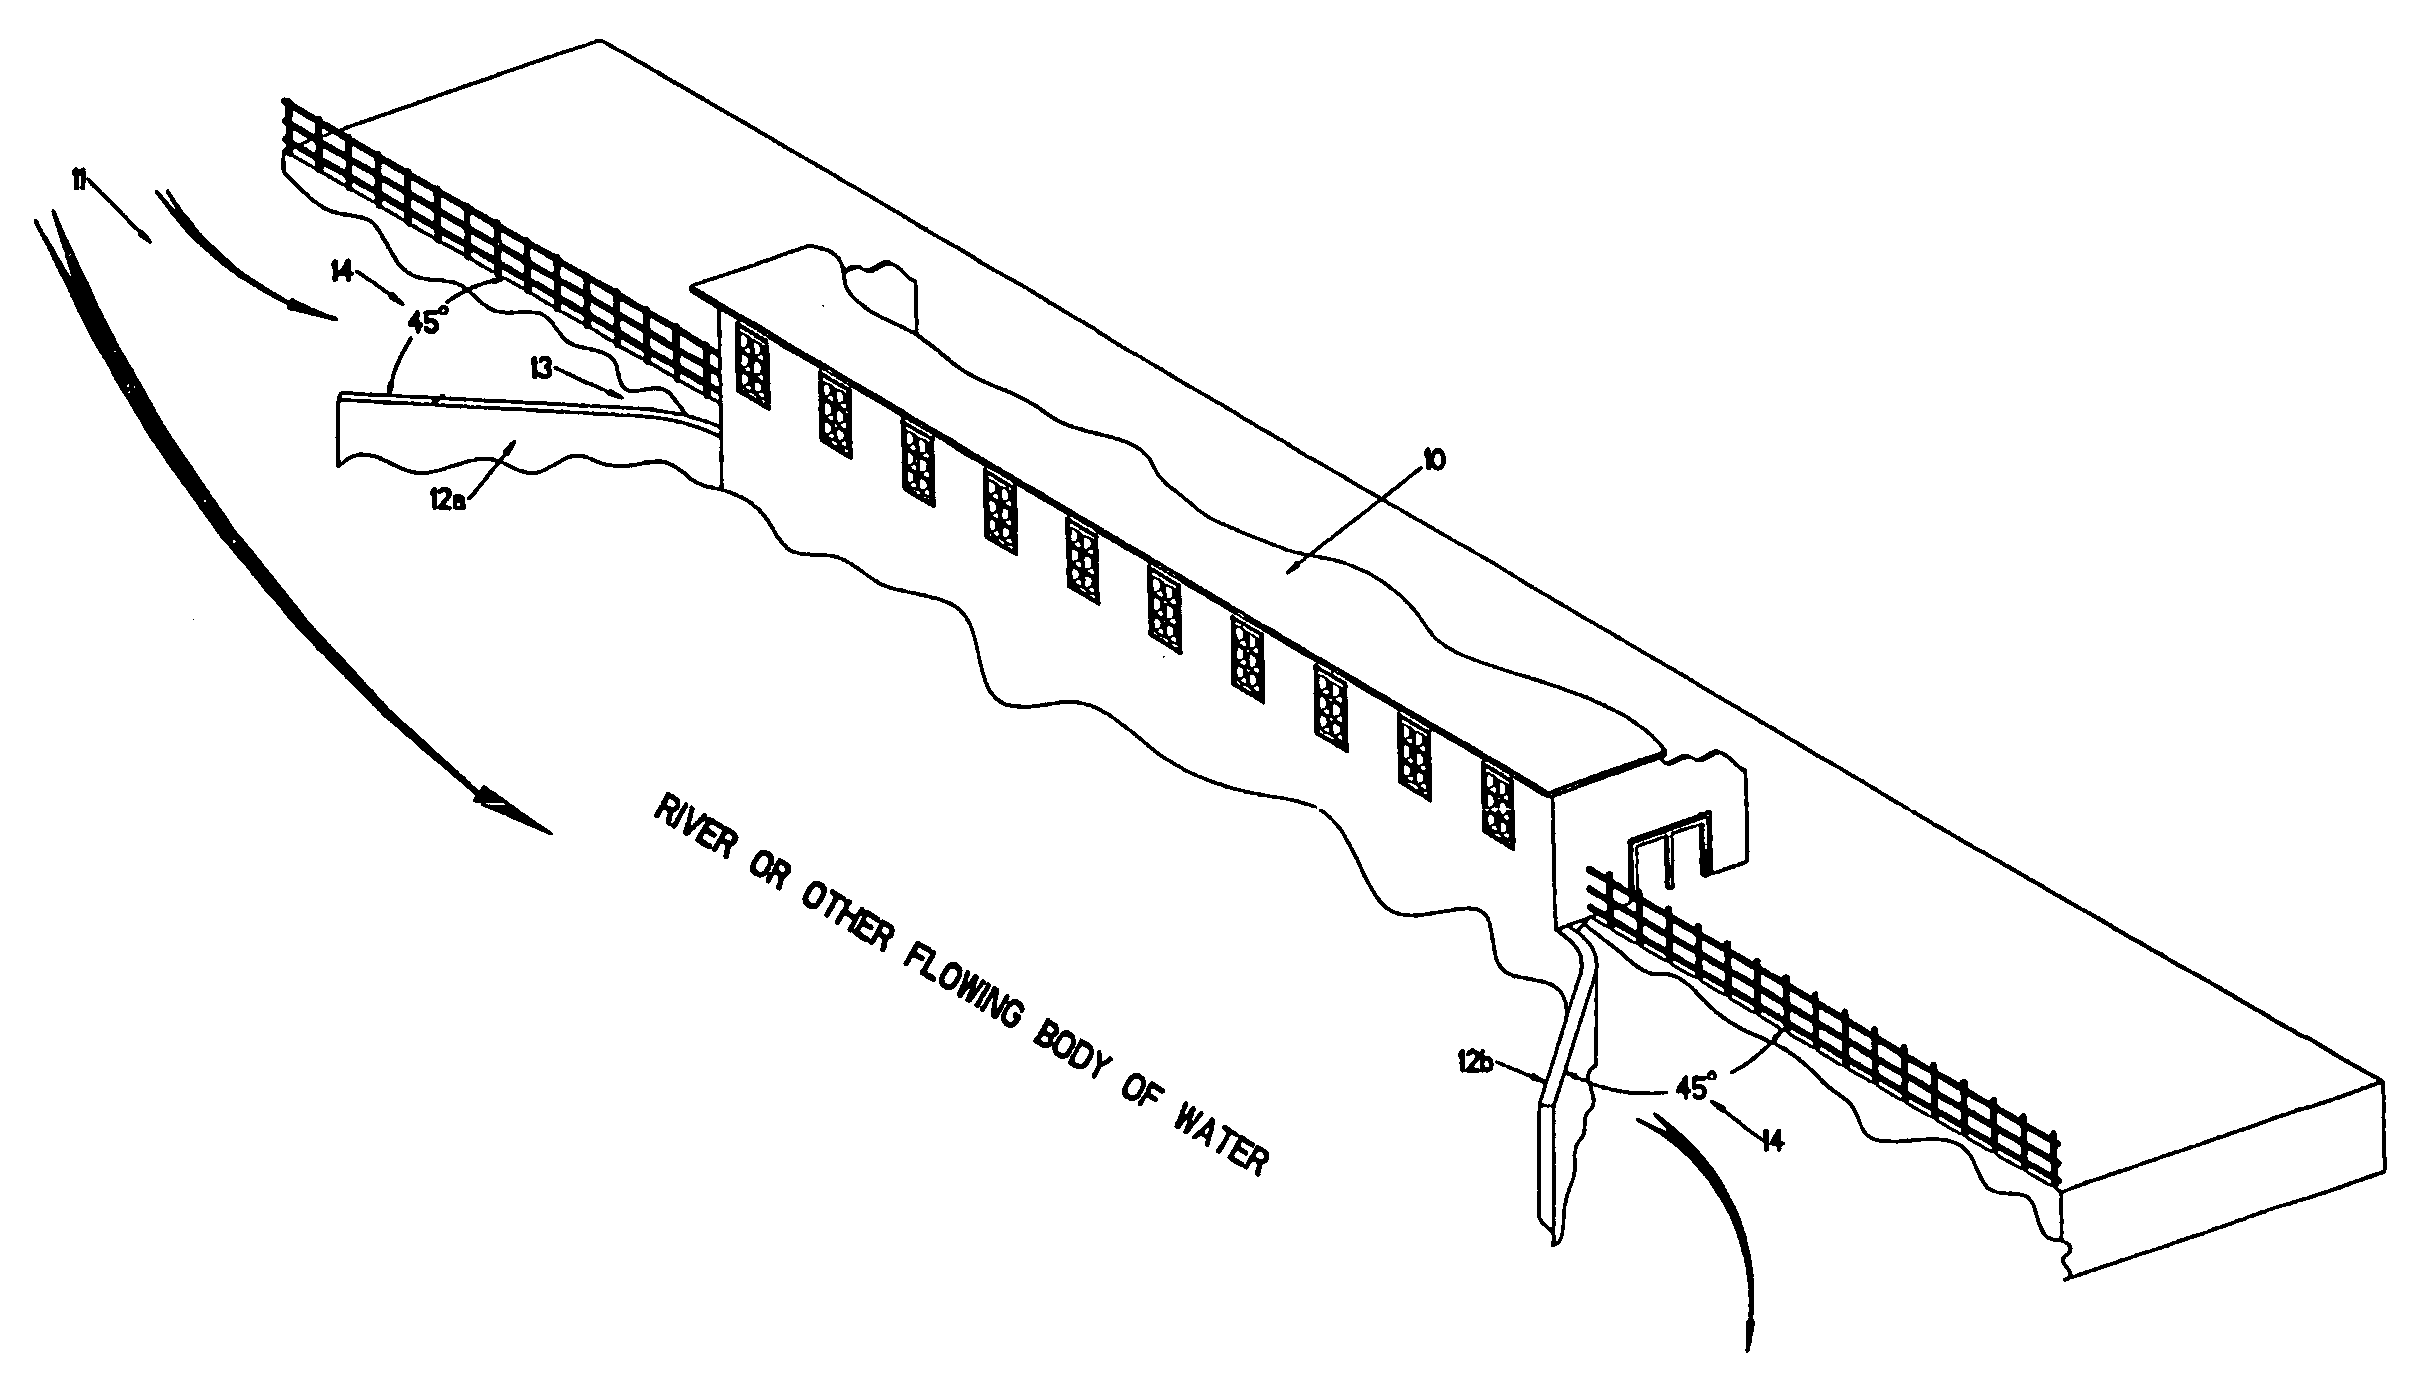 Hydro-electric power generating system